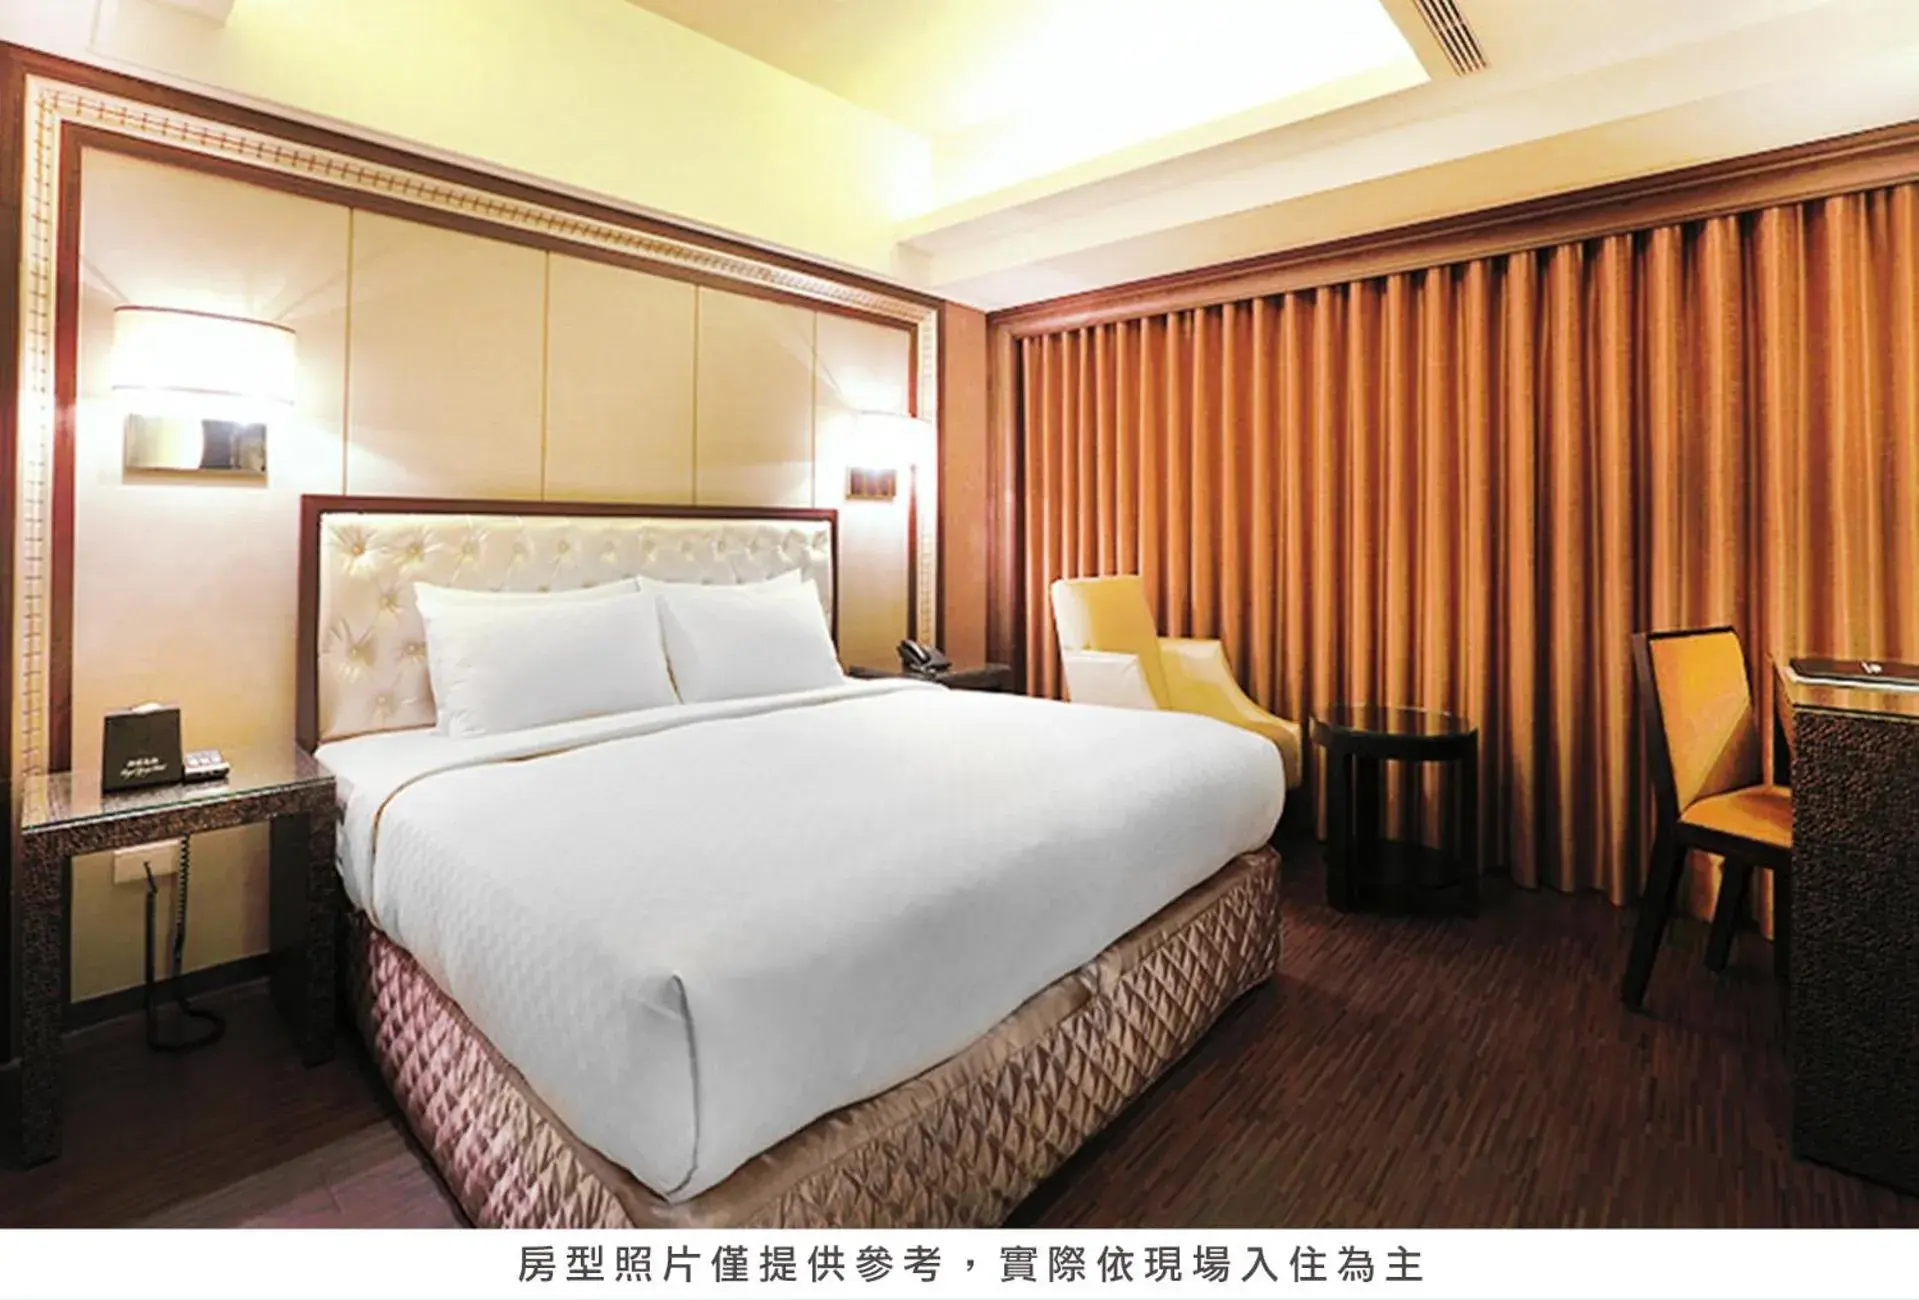 Bed in Royal Group Hotel Chang Chien Branch